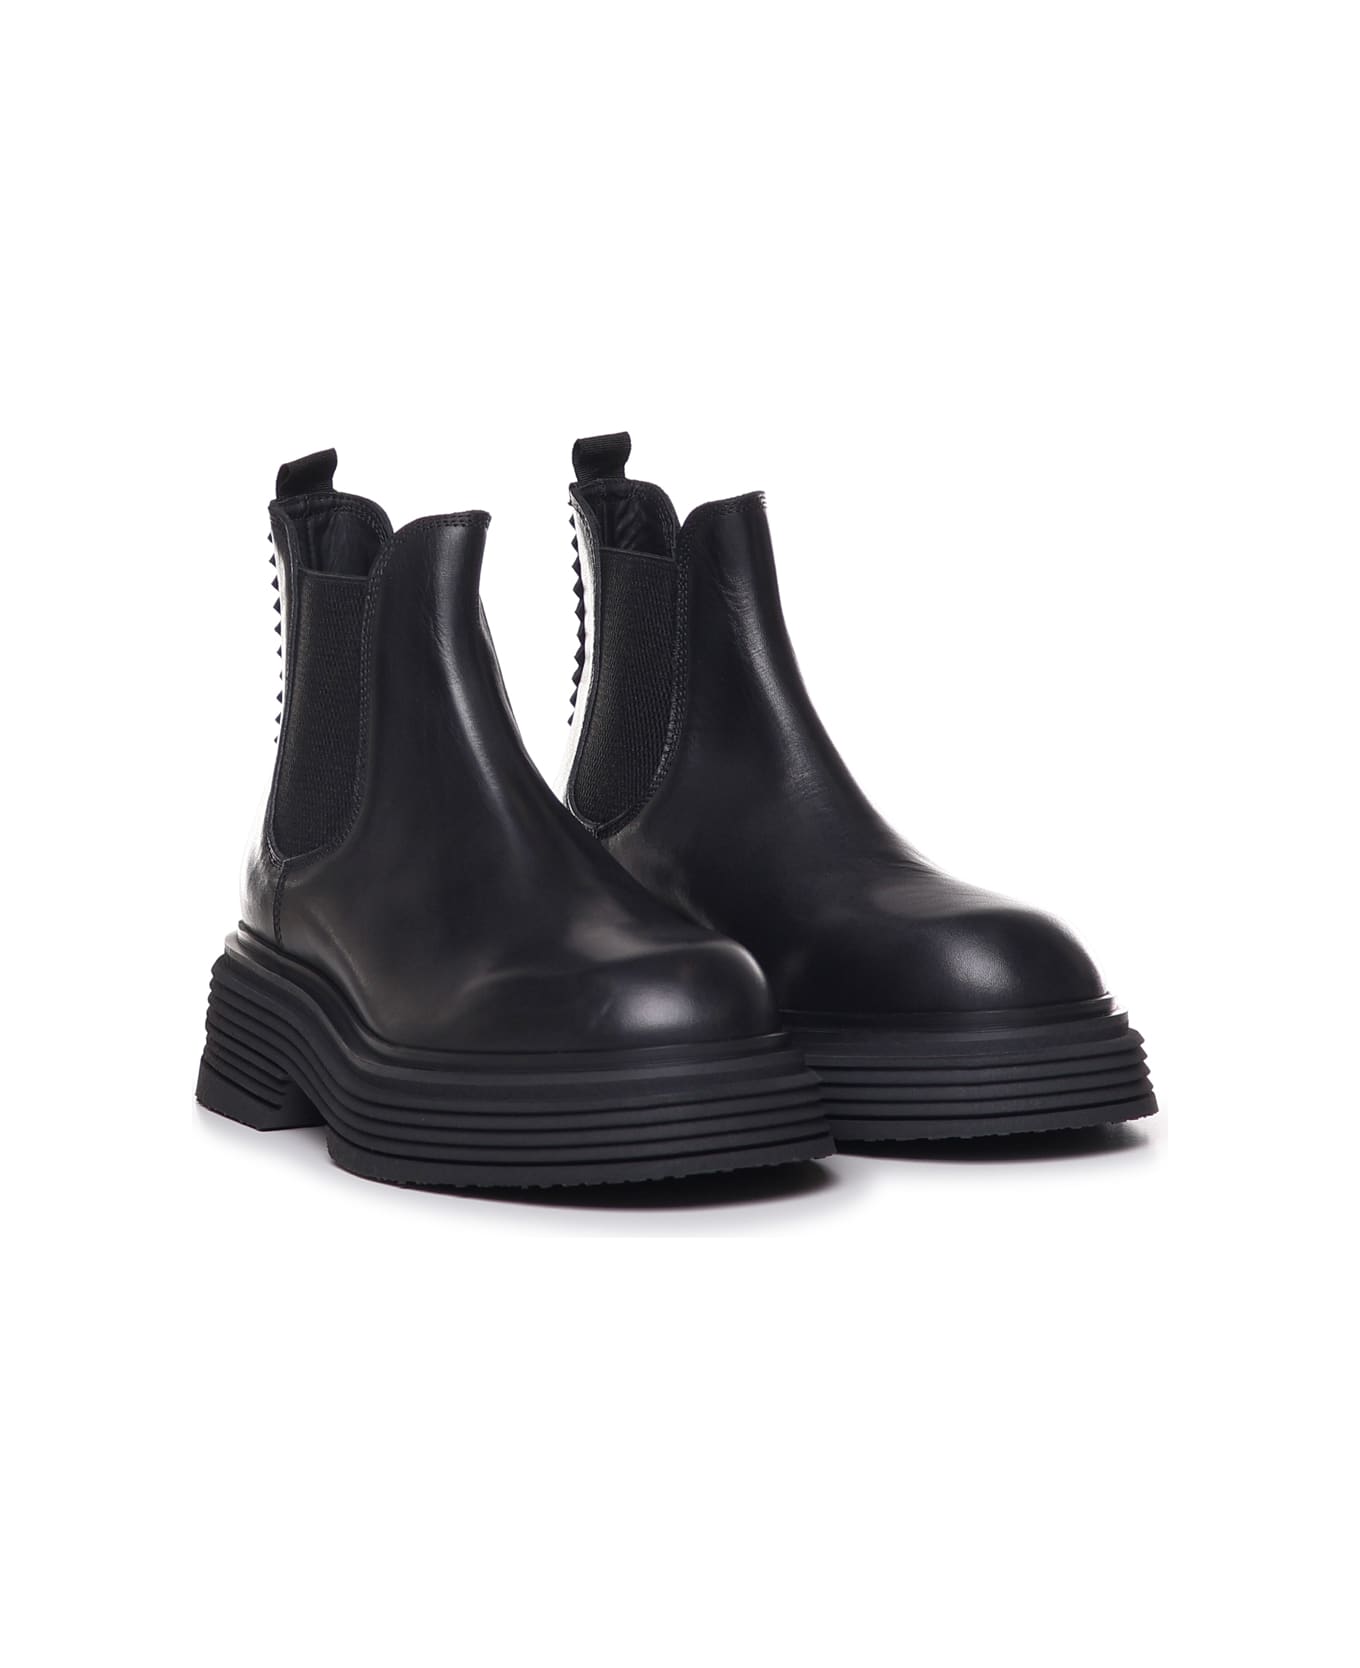 The Antipode Leather Beatles Boots - Black ブーツ